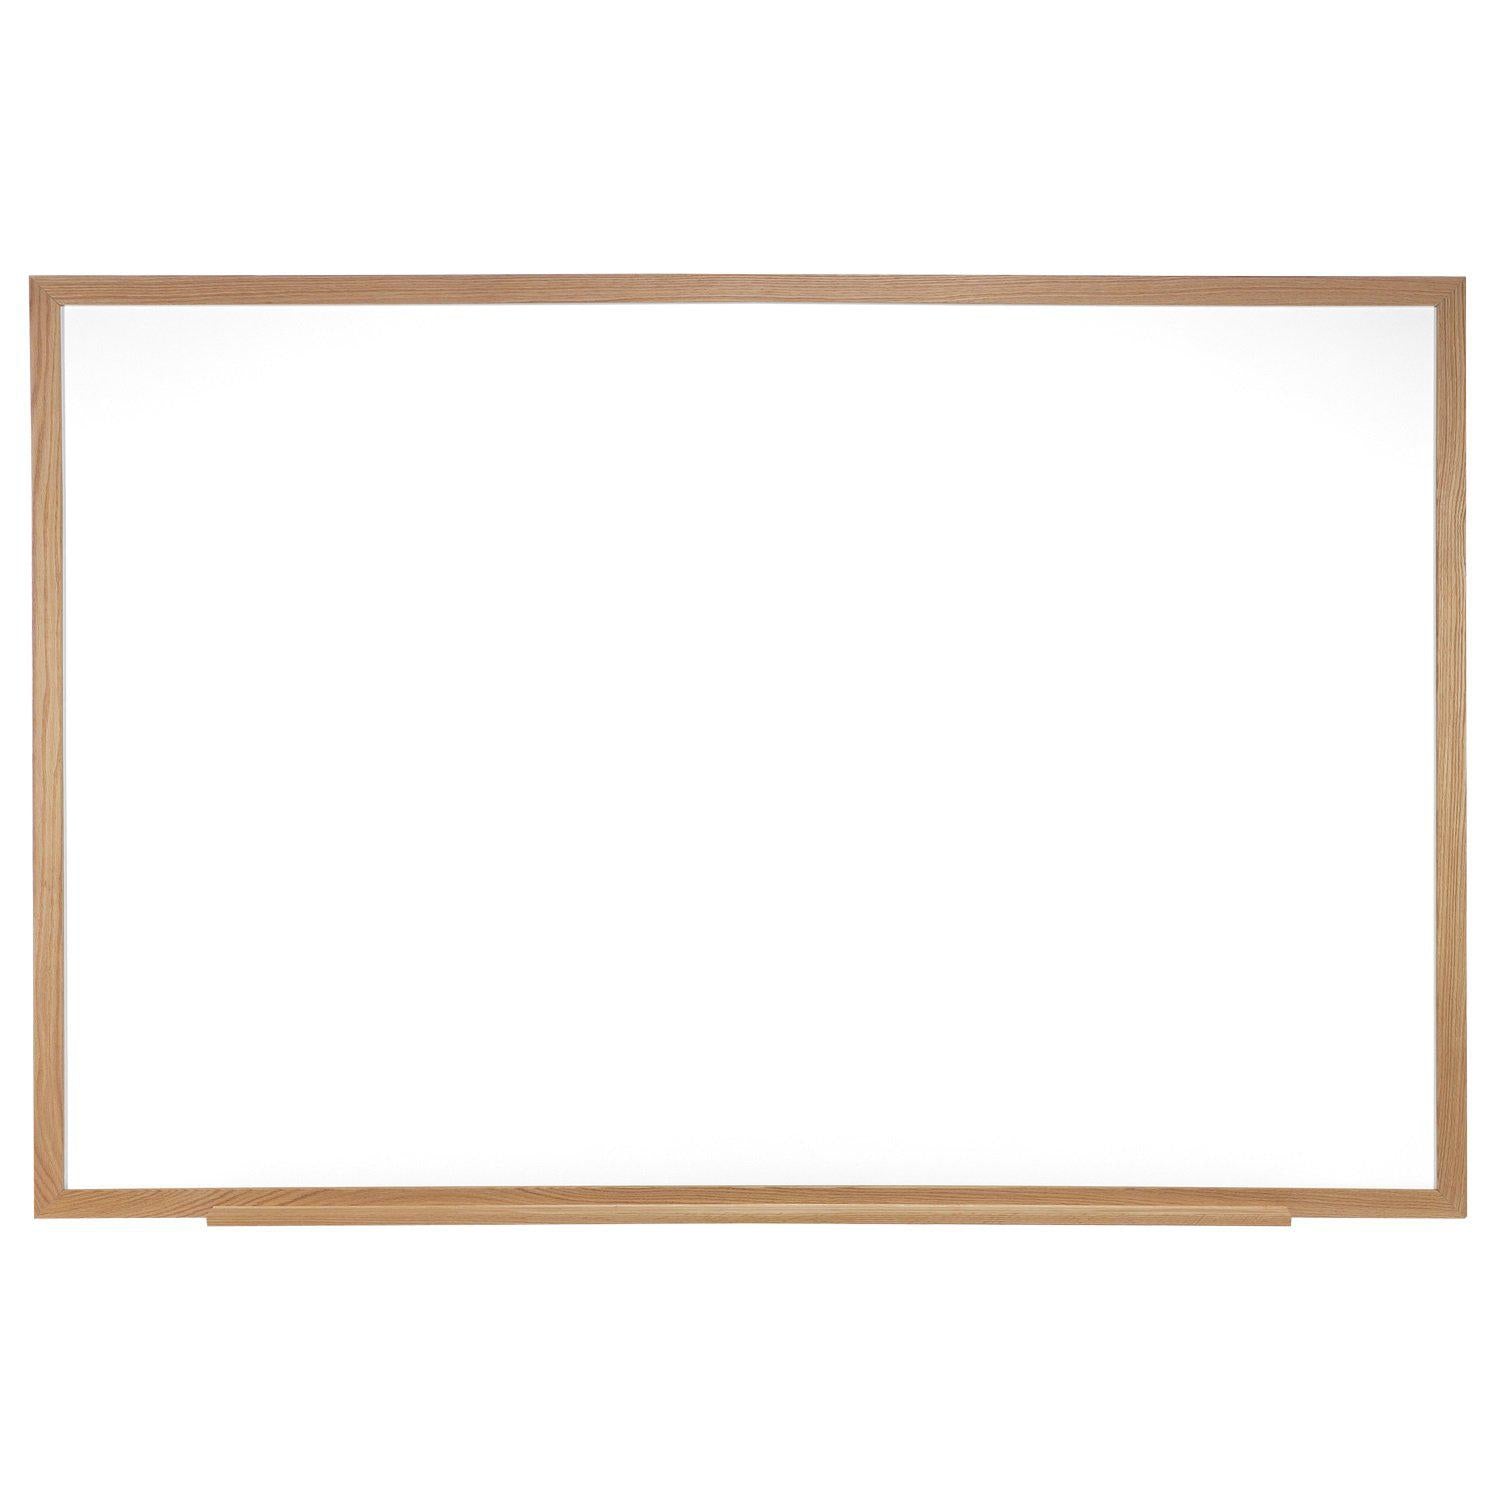 Magnetic Porcelain Whiteboard with Detachable Marker Tray, Wood Frame, 4' H x 8' W, LIFETIME WARRANTY